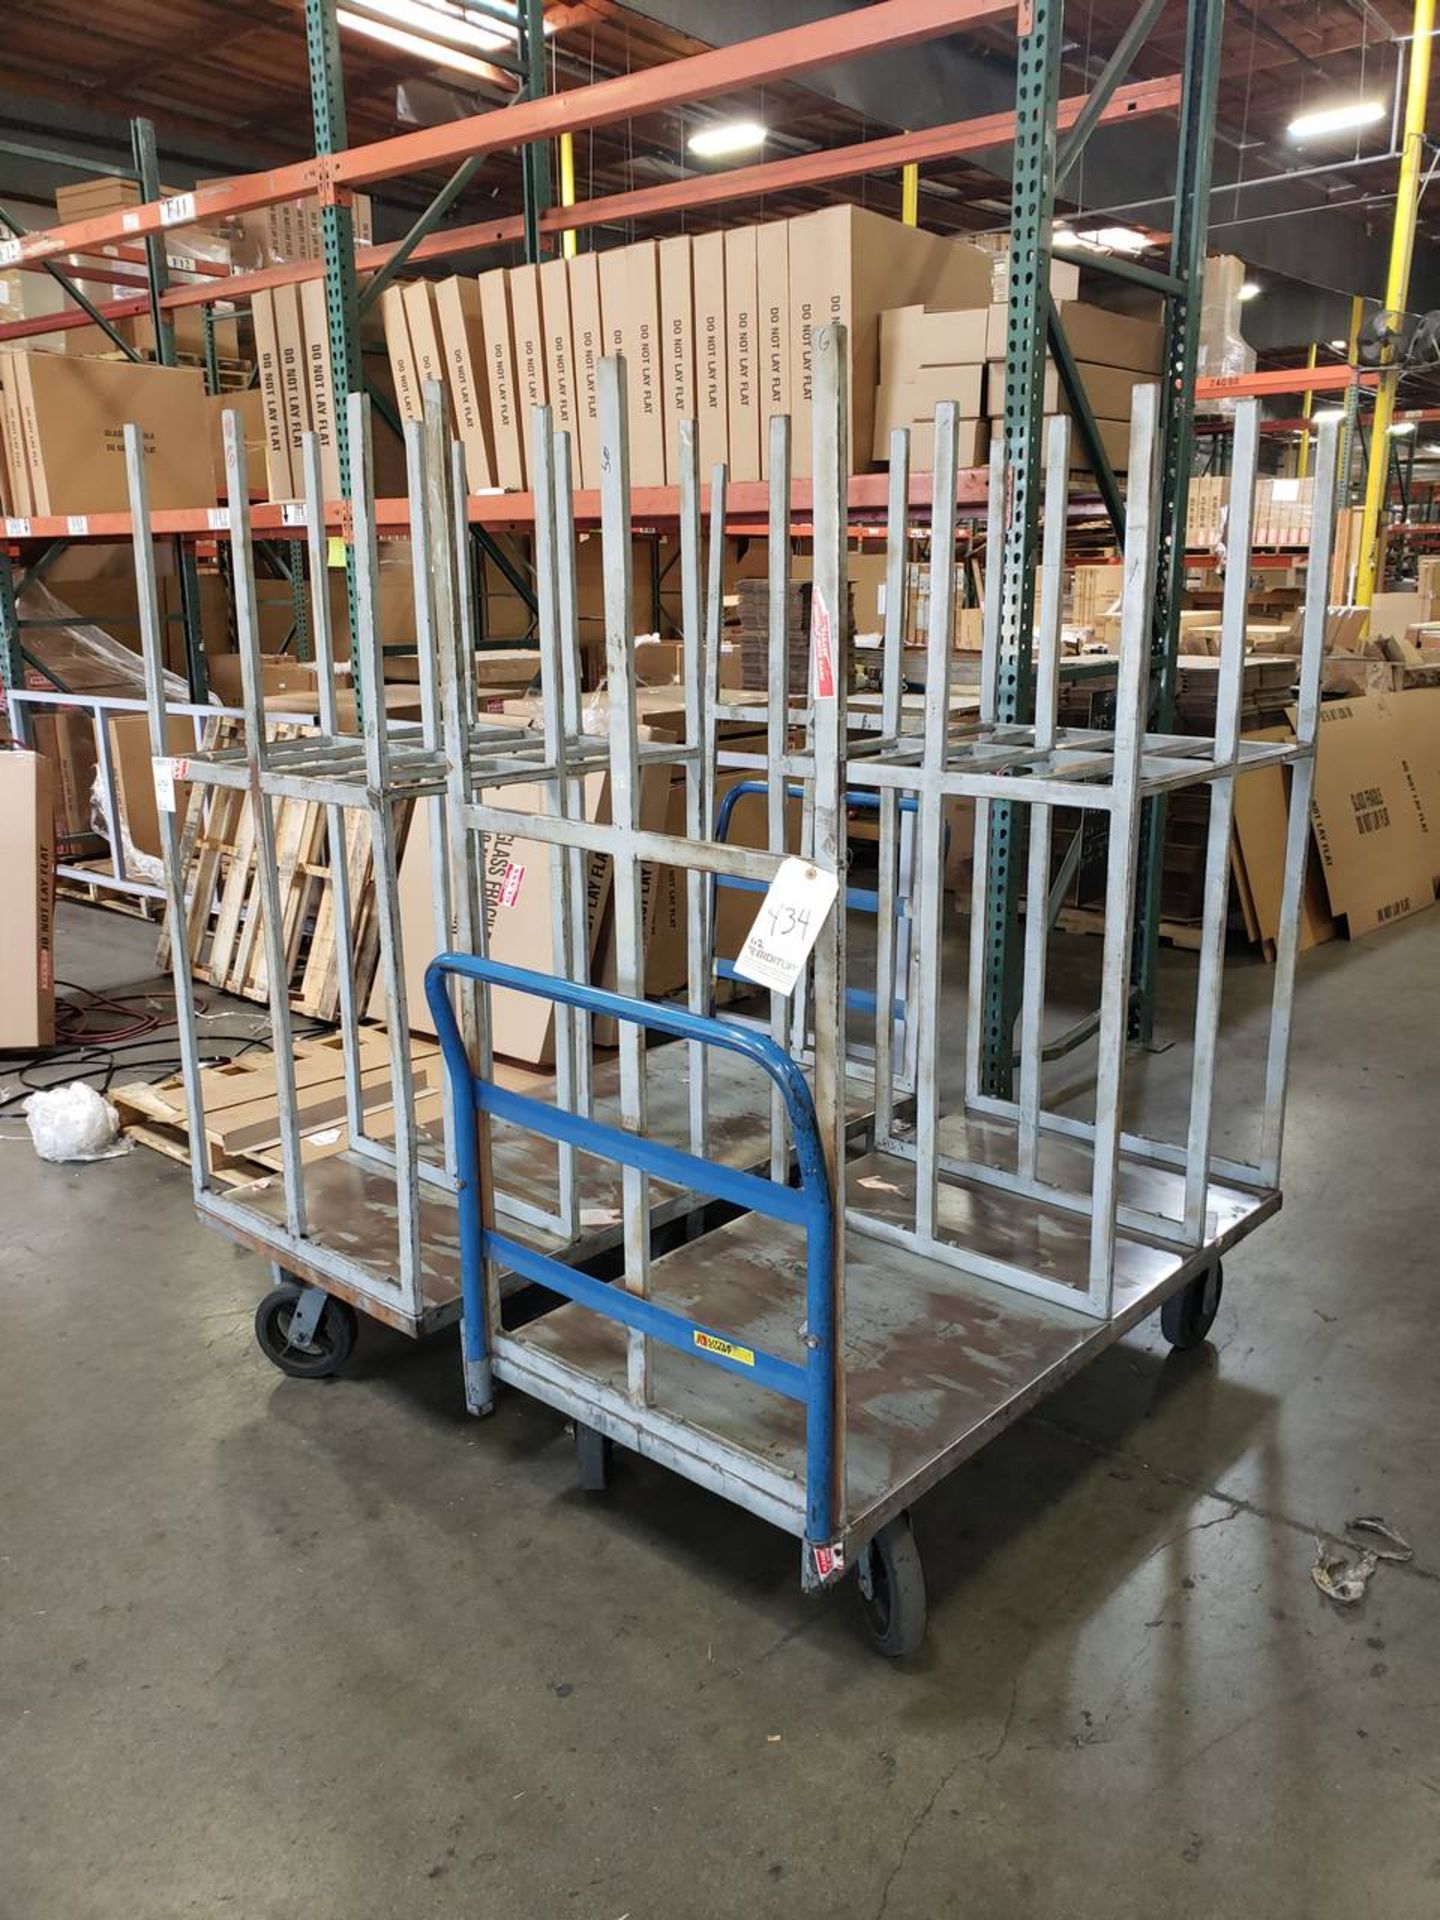 Material Handling Carts 62""H x 29.5""W x 62""L - Image 2 of 2